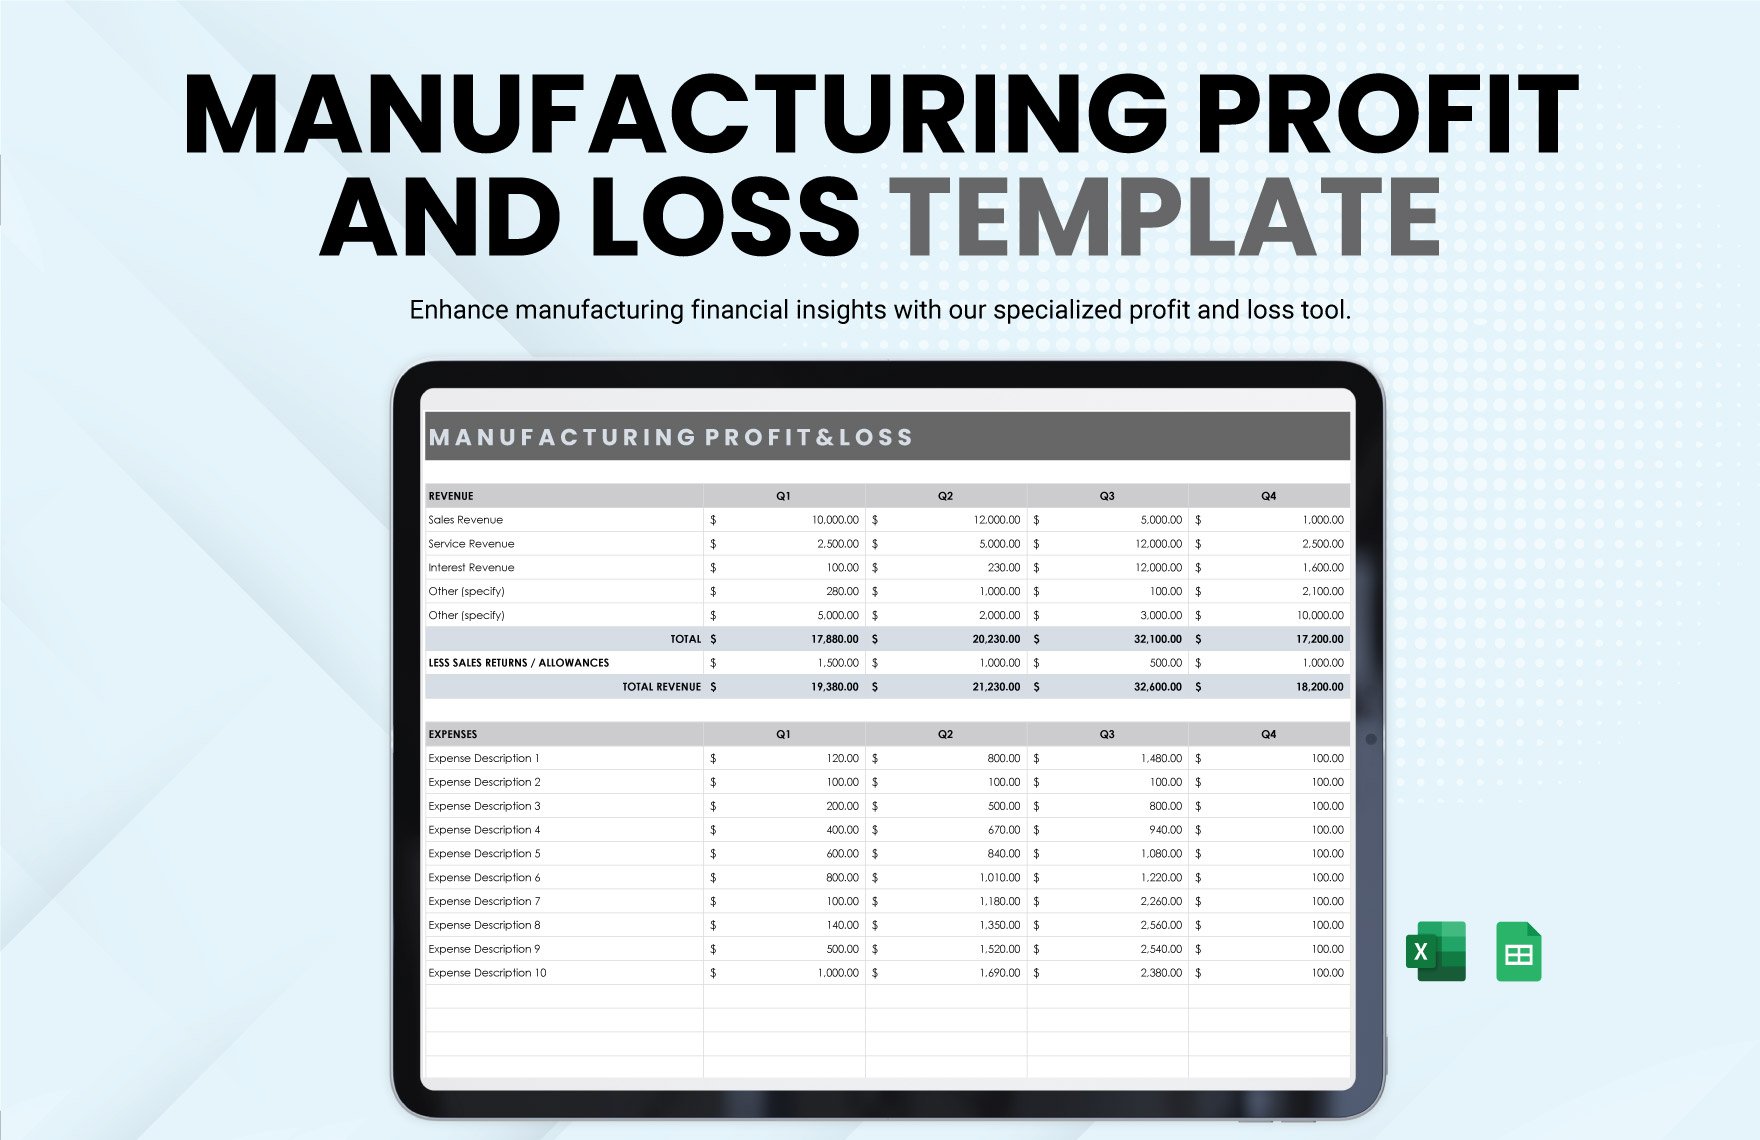 Manufacturing Profit and Loss Template